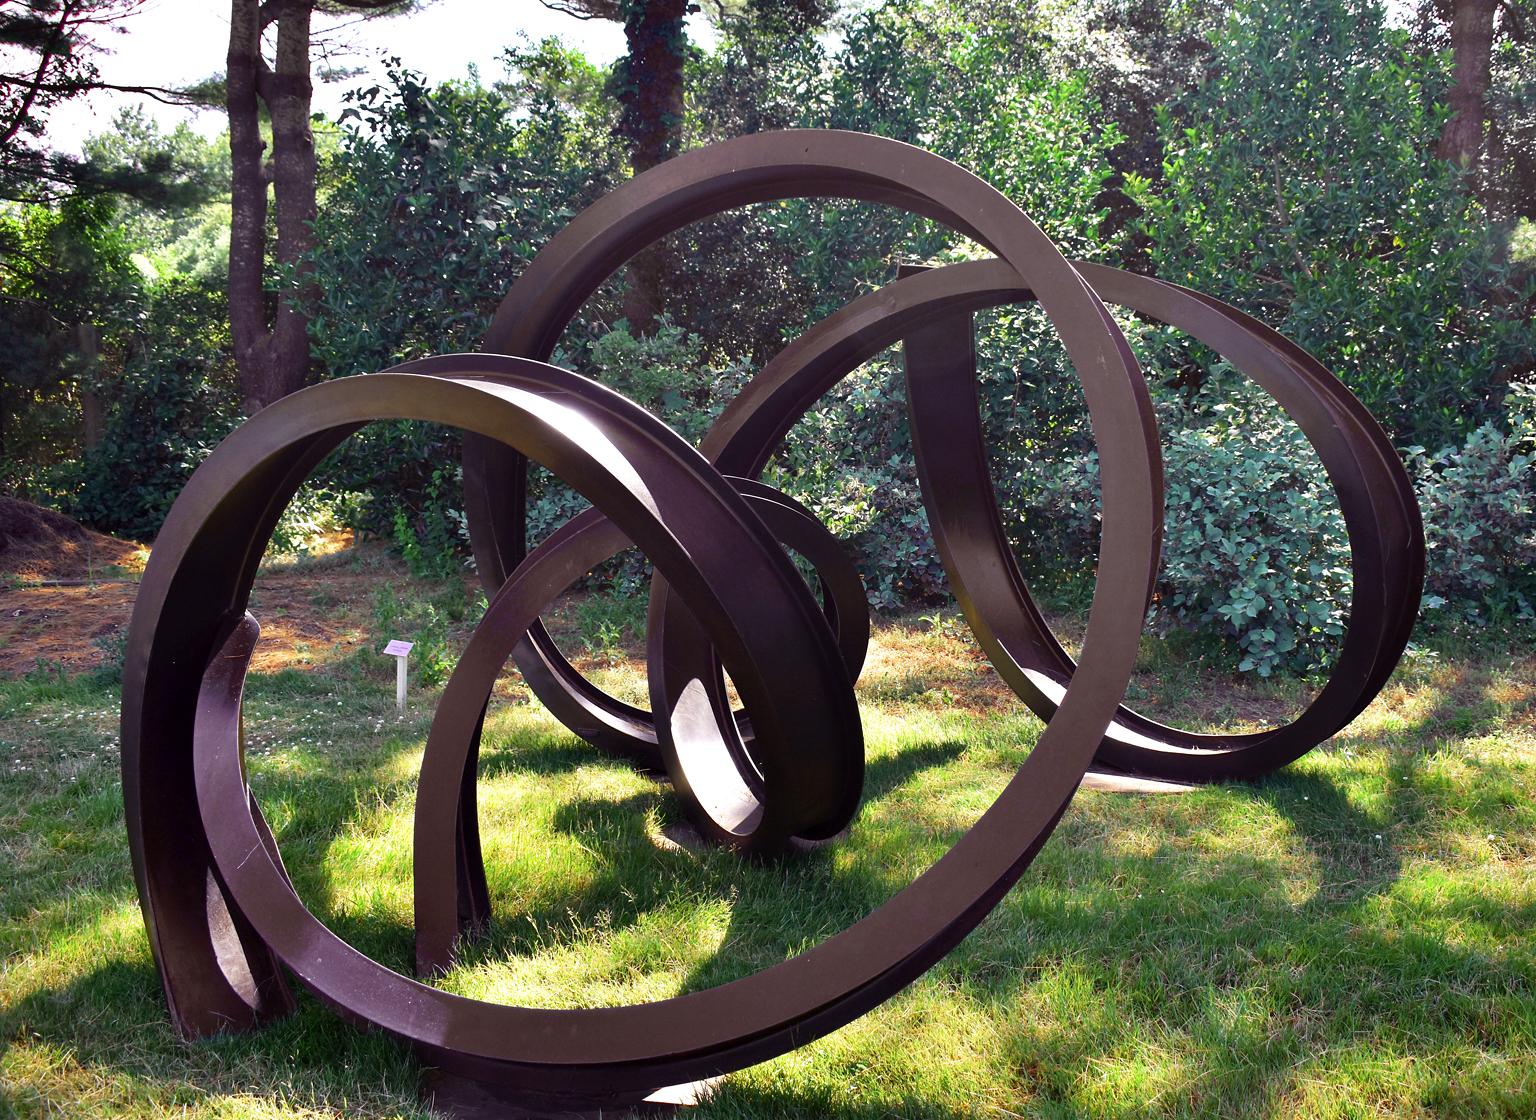 Carole Eisner Abstract Sculpture - "Zerques", Abstract, Organic, Industrial Large-Scale Outdoor Sculpture in steel